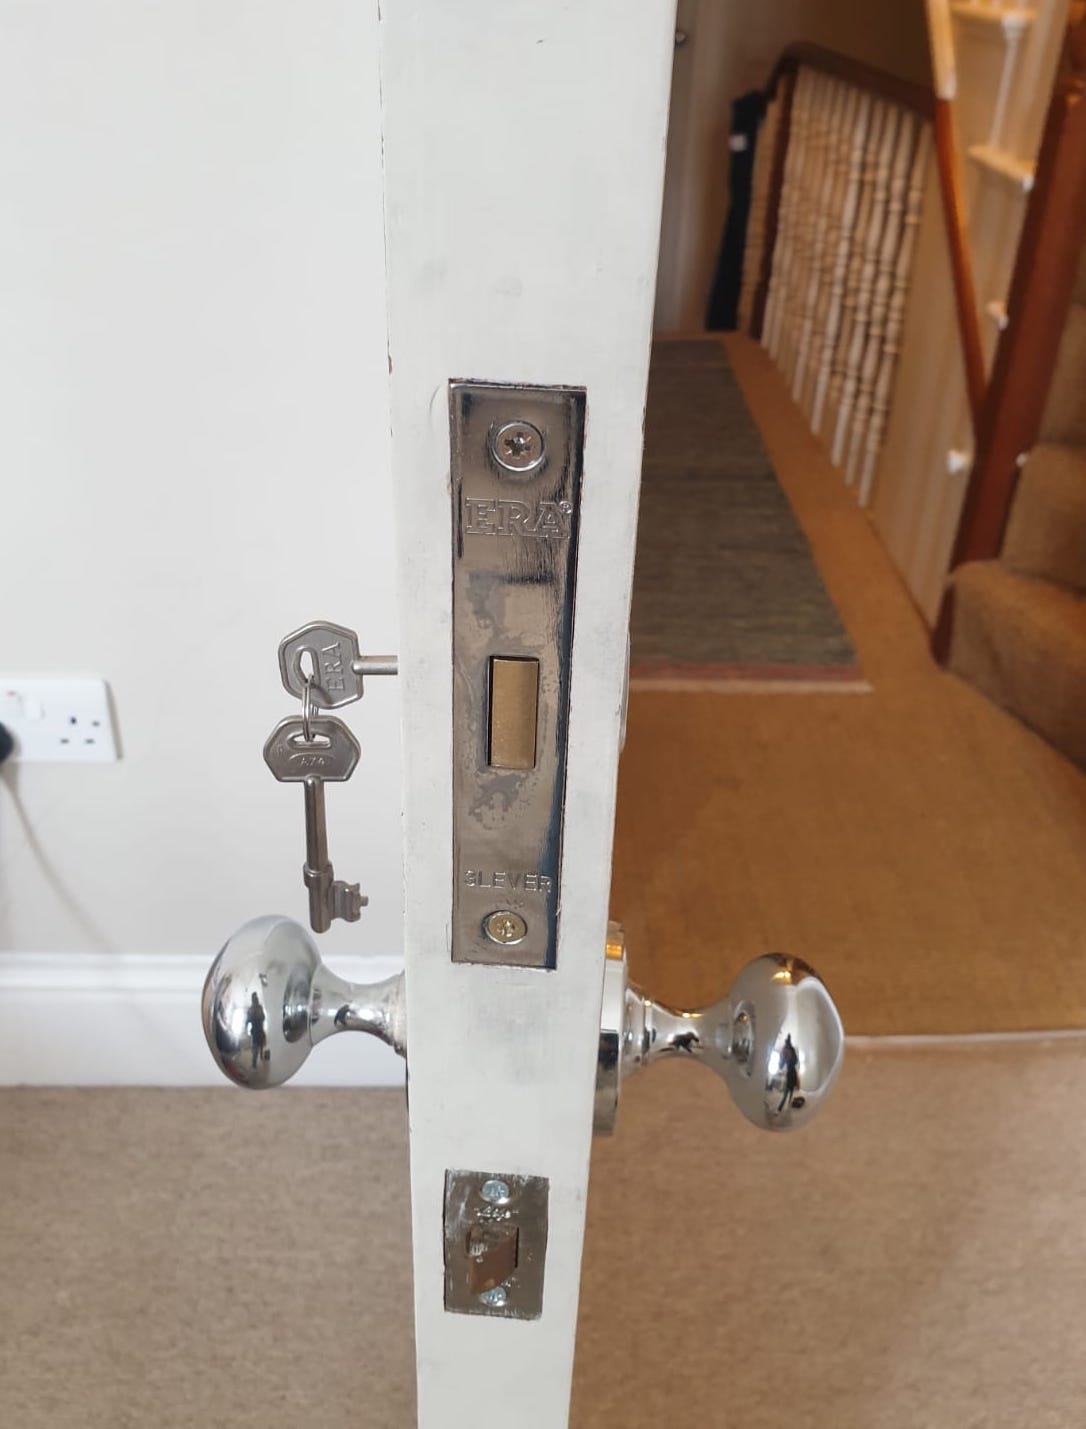 Dead lock with keys and bolt profile